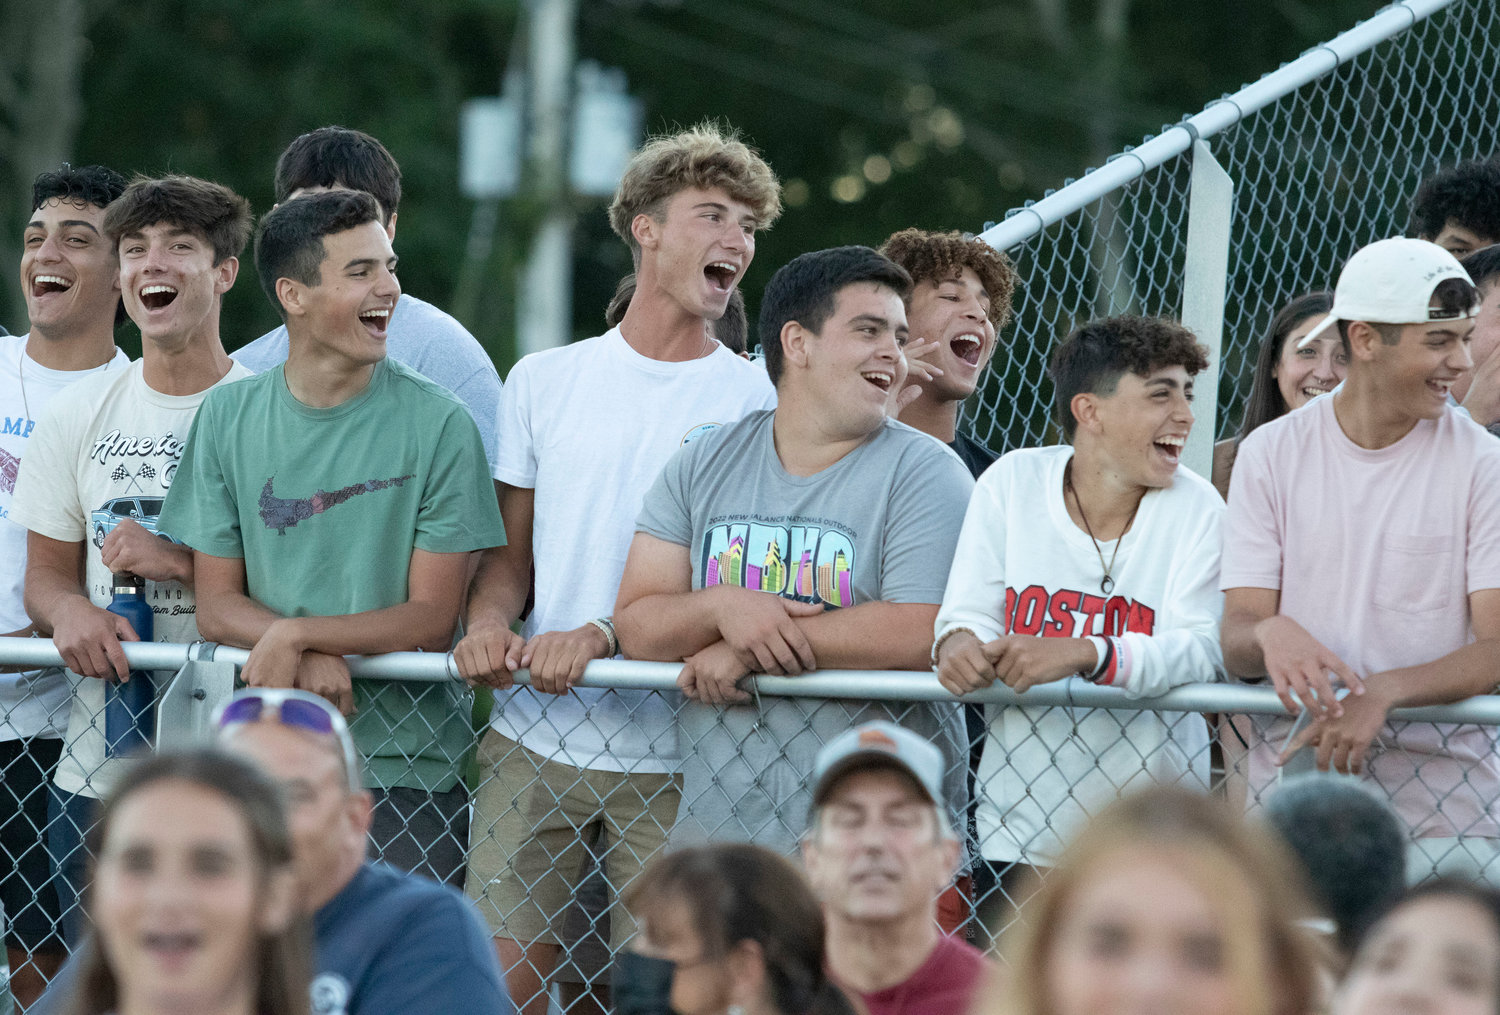 Tiverton fans cheer on the Tigers during the game.